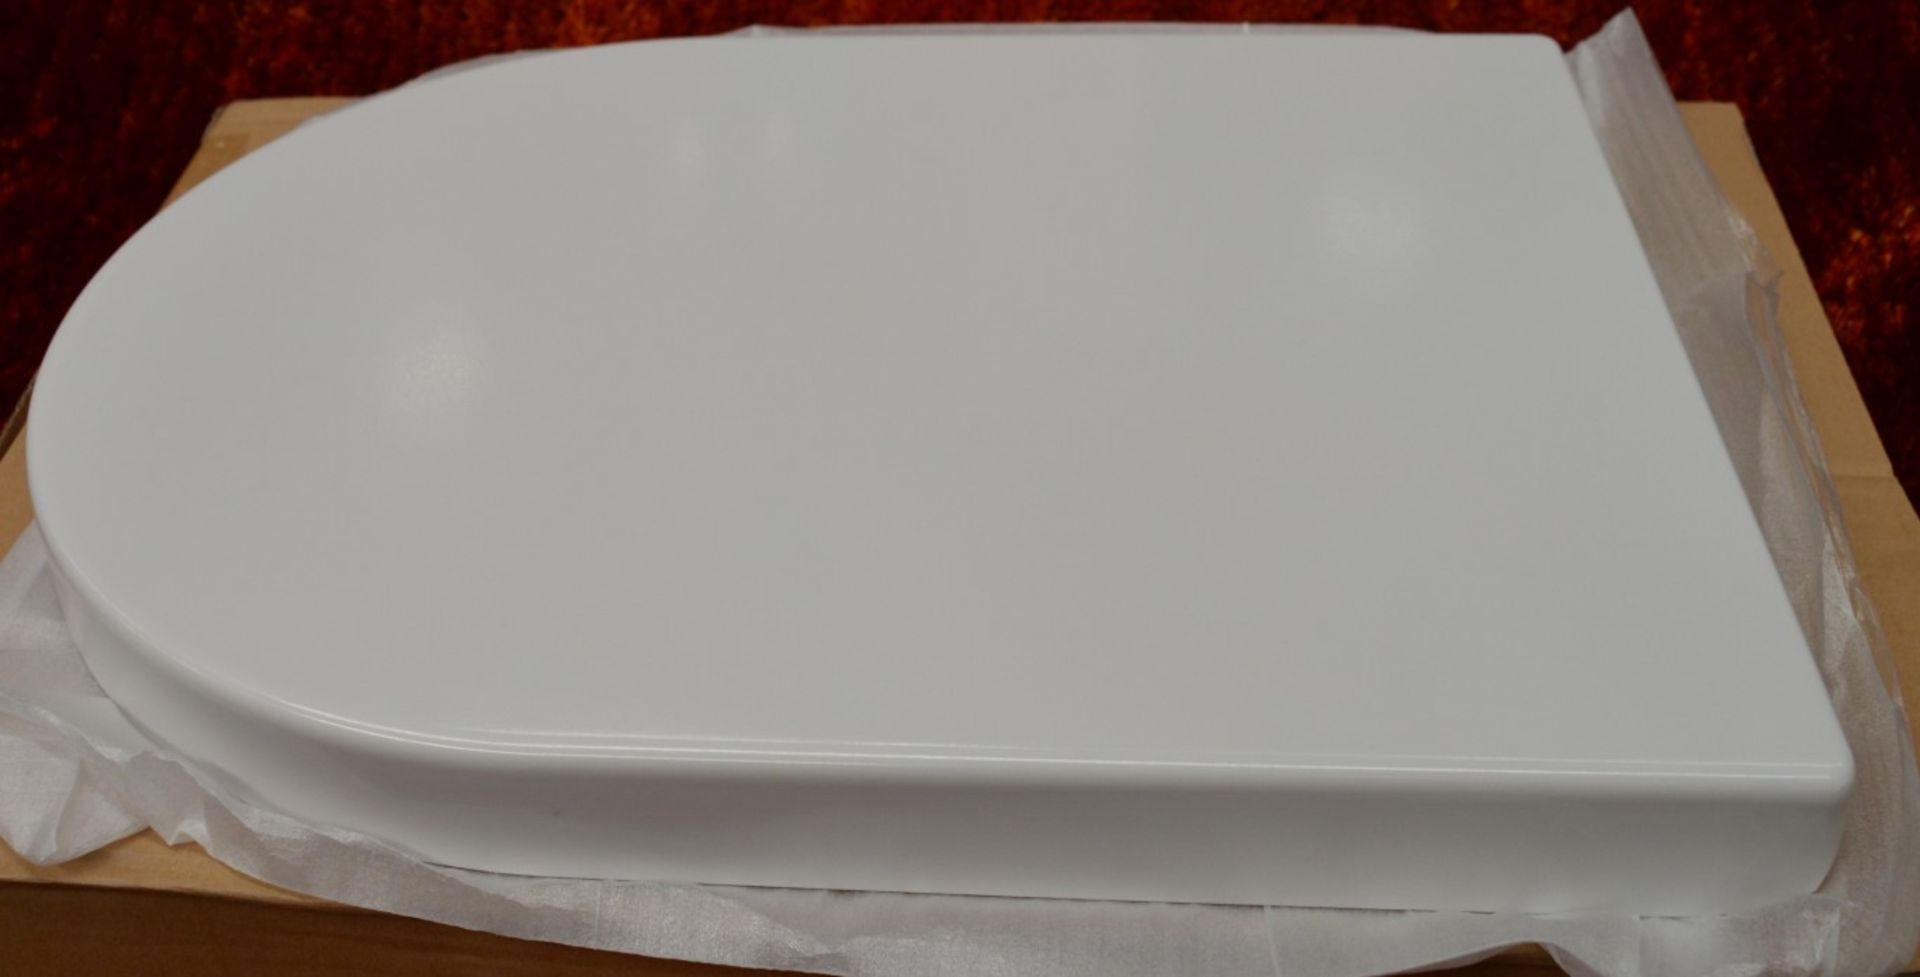 1 x Vogue Cosmos Modern White Soft Close Toilet Seat and Cover Top Fixing - Brand New Boxed - Image 2 of 7